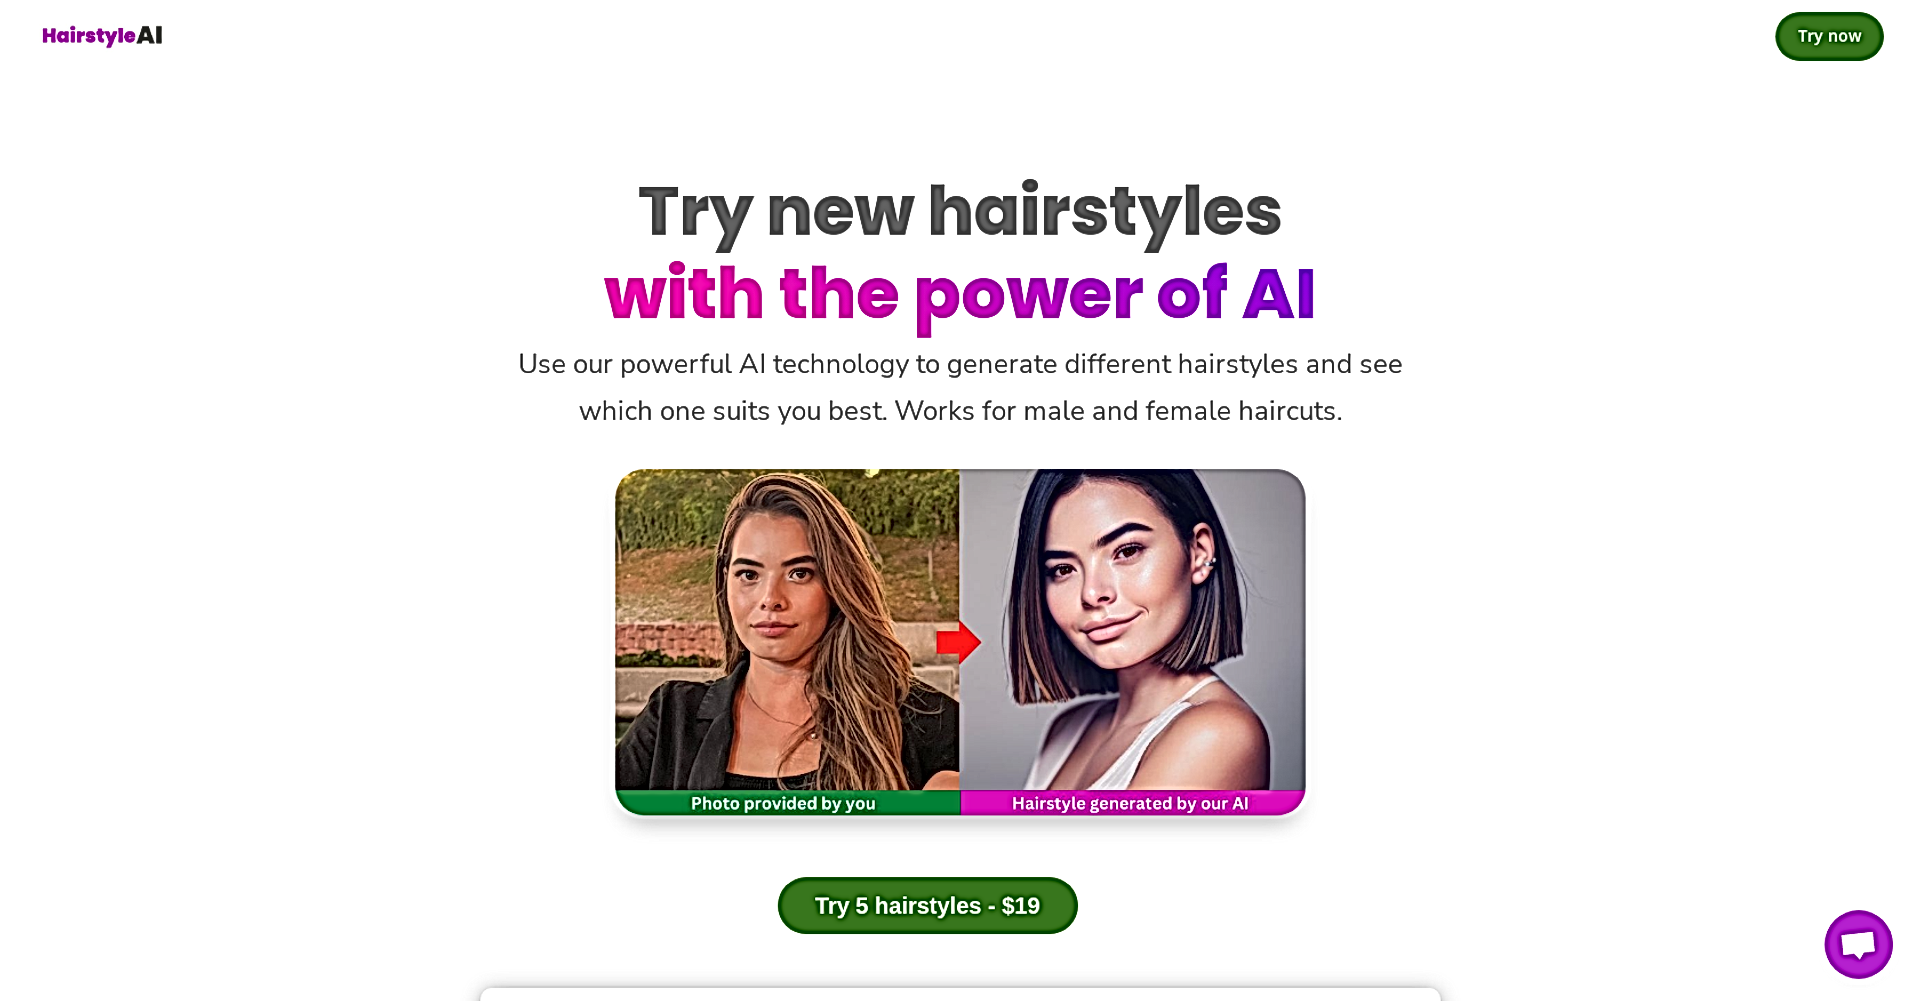 HairstyleAI featured